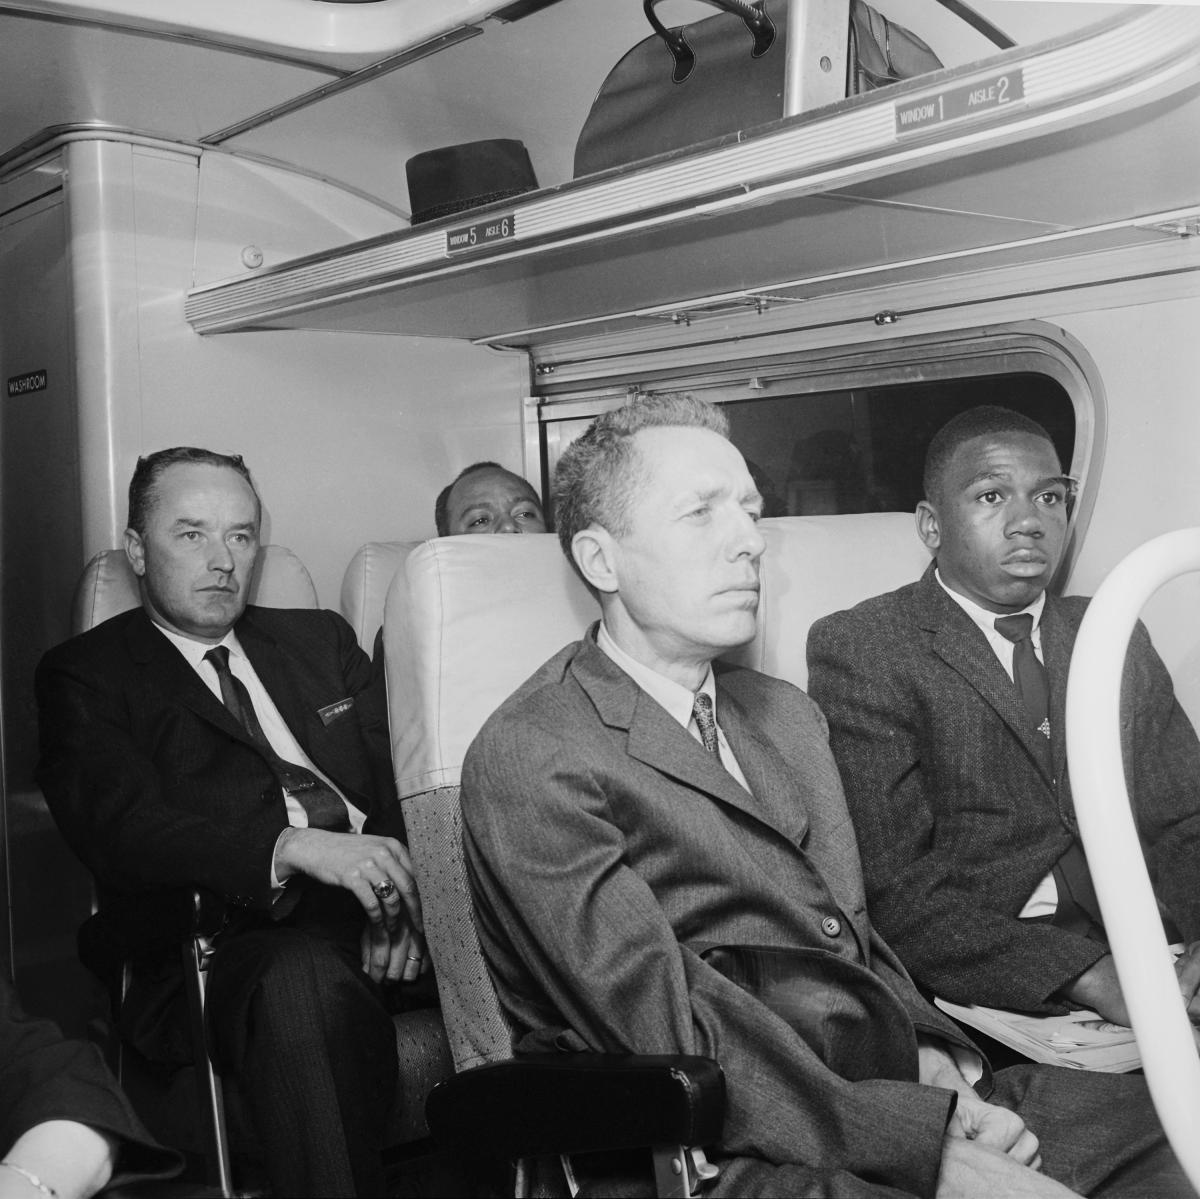 A white man and an African American man, in suits, sit next to each other on one of the Freedom Riders' buses